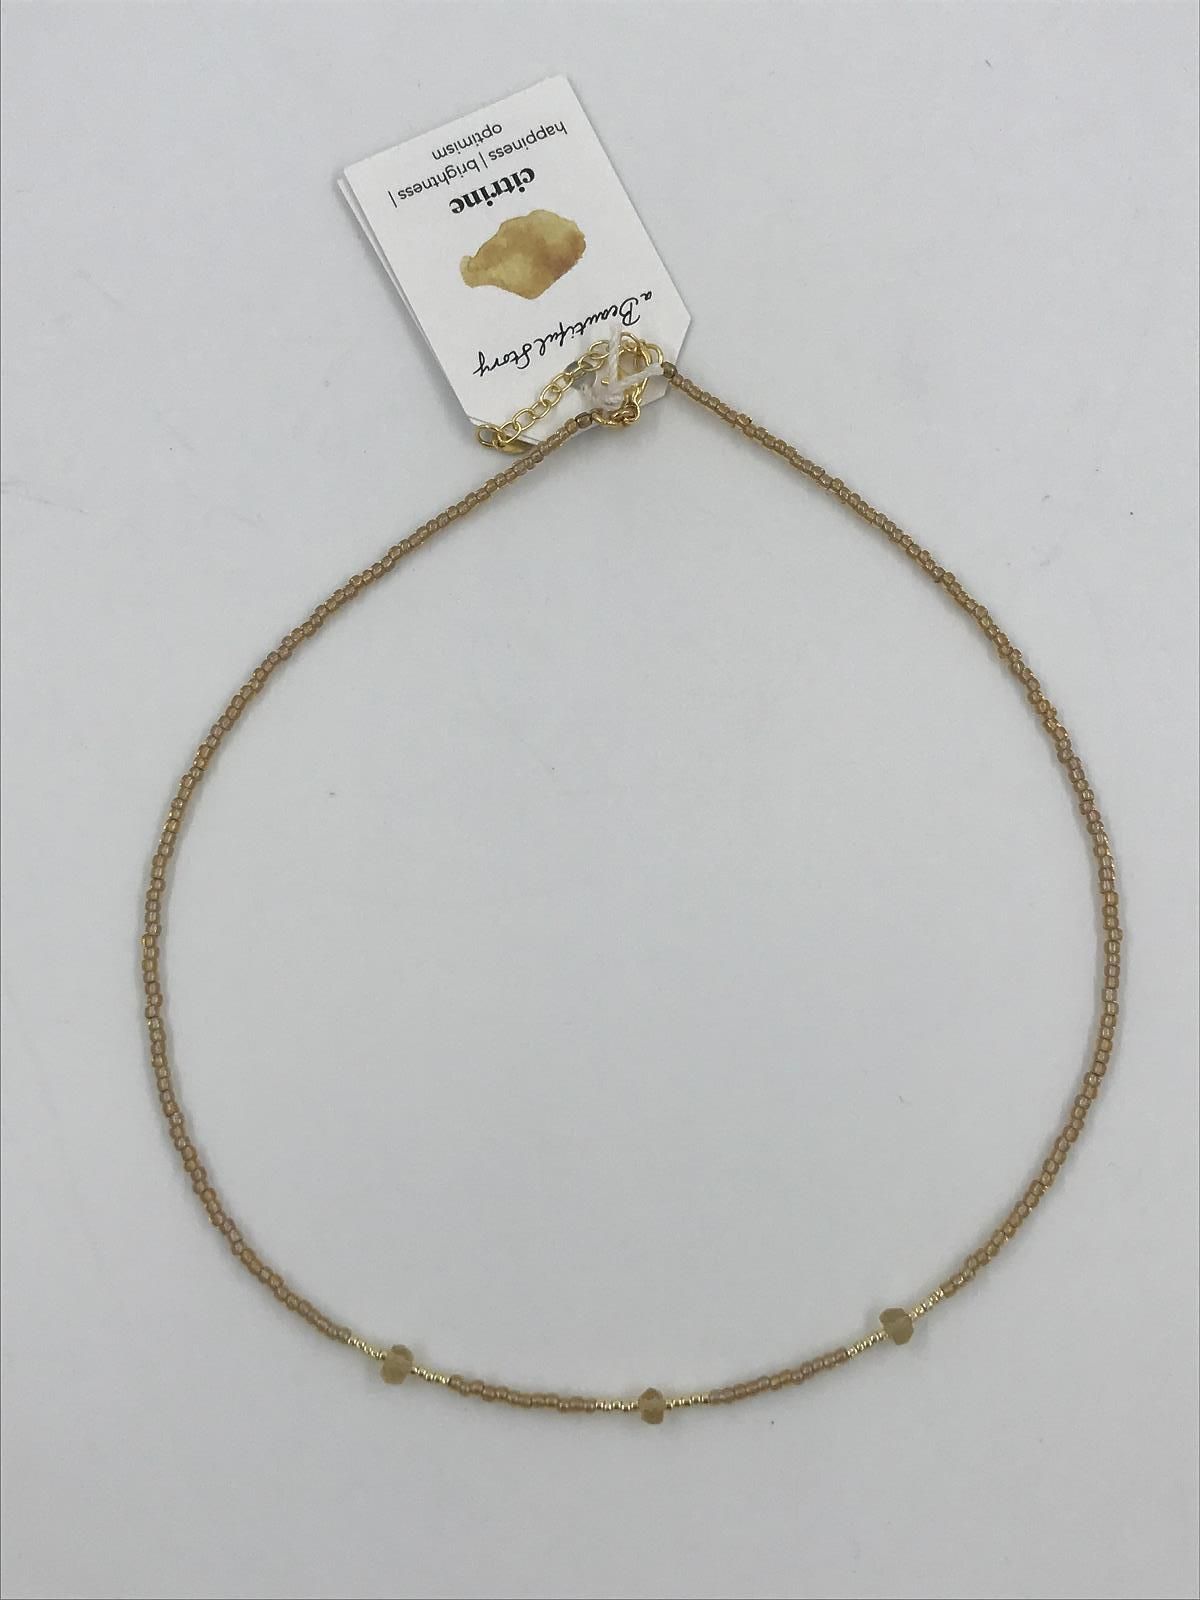 aBStory brightly citrine necklace GC (BL23305 brightly citrine necklace GC) - Stiletto Schoenen (Oudenaarde)